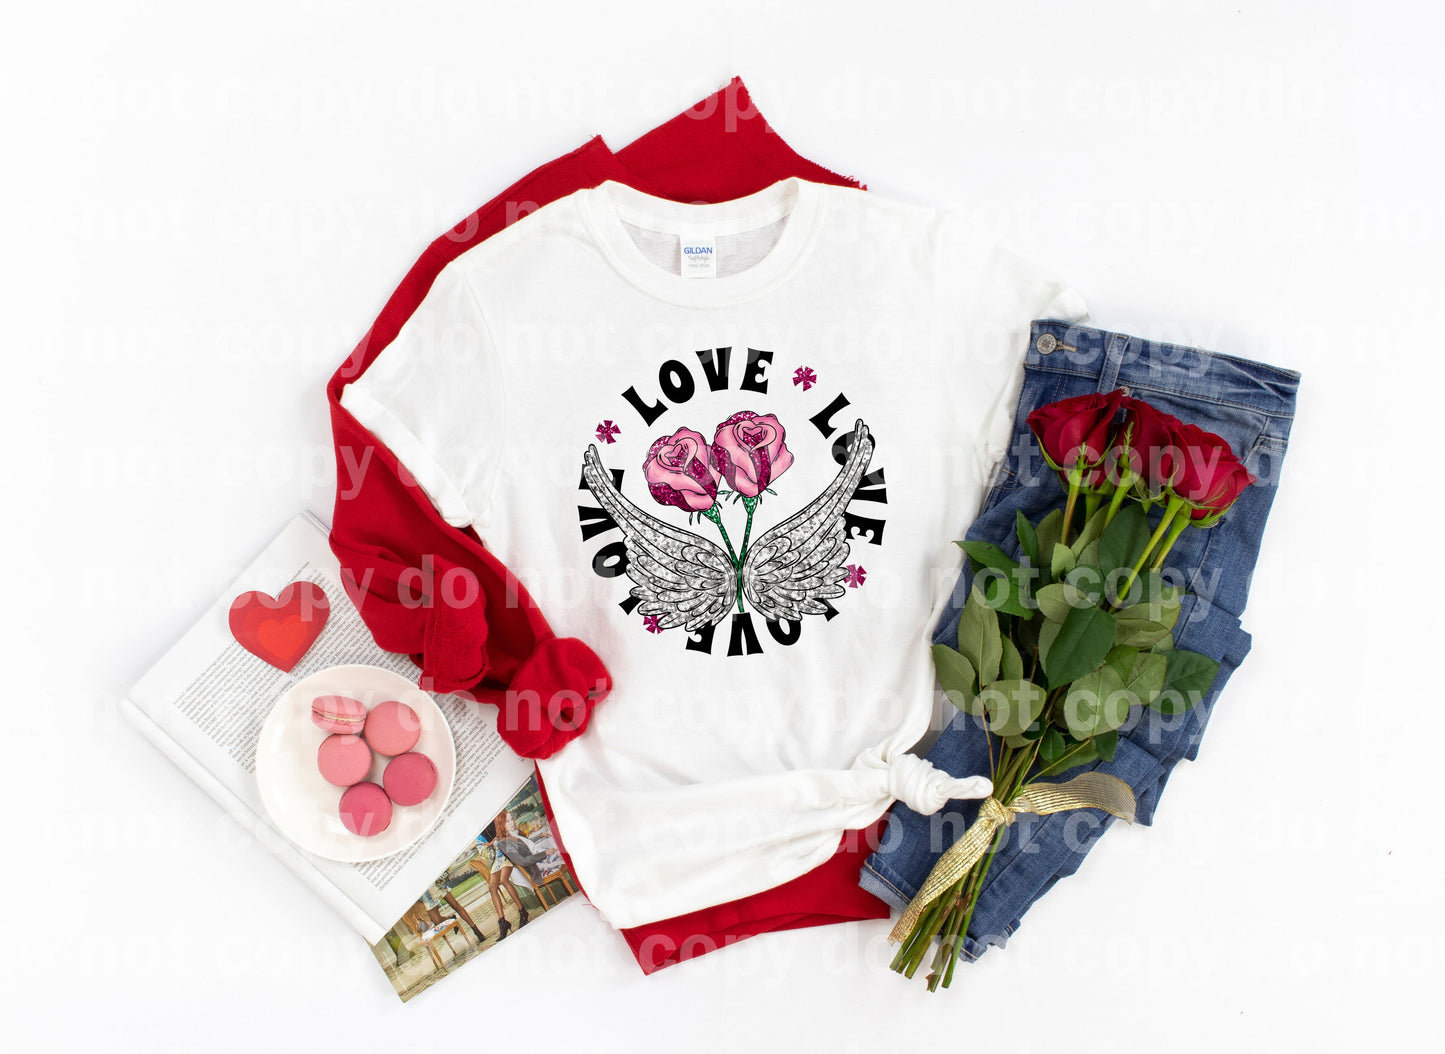 Love Wings Flowers  with Pocket Option Dream Print or Sublimation Print